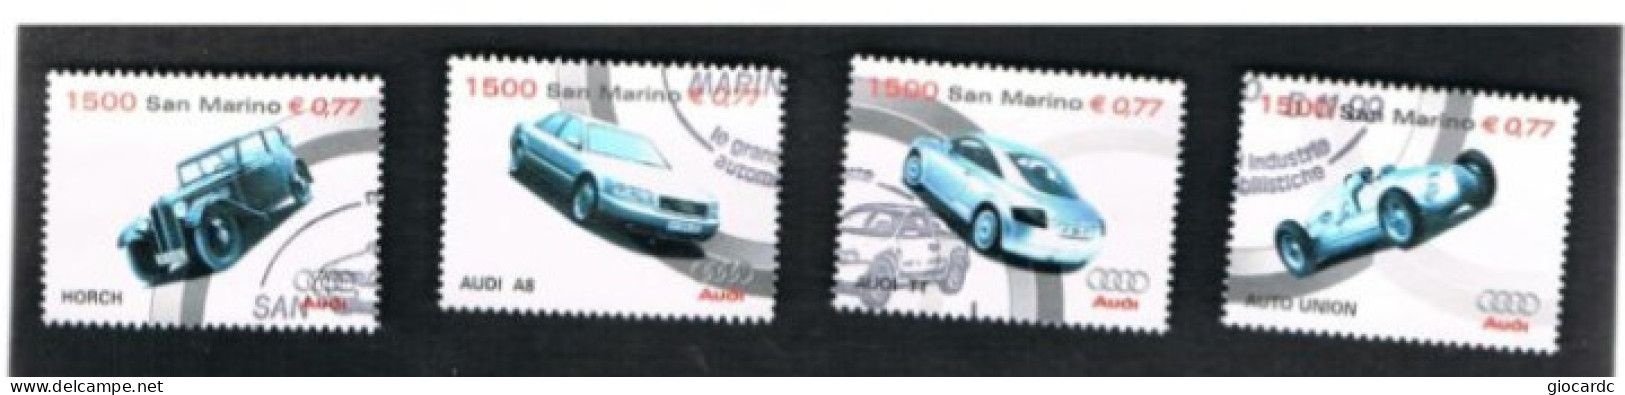 SAN MARINO - UN 1705.1708 - 1999 GRANDI INDUSTRIE AUTOMOBILISTICHE : AUDI (COMPLET SET OF 4, BY BF)   - USED - Used Stamps